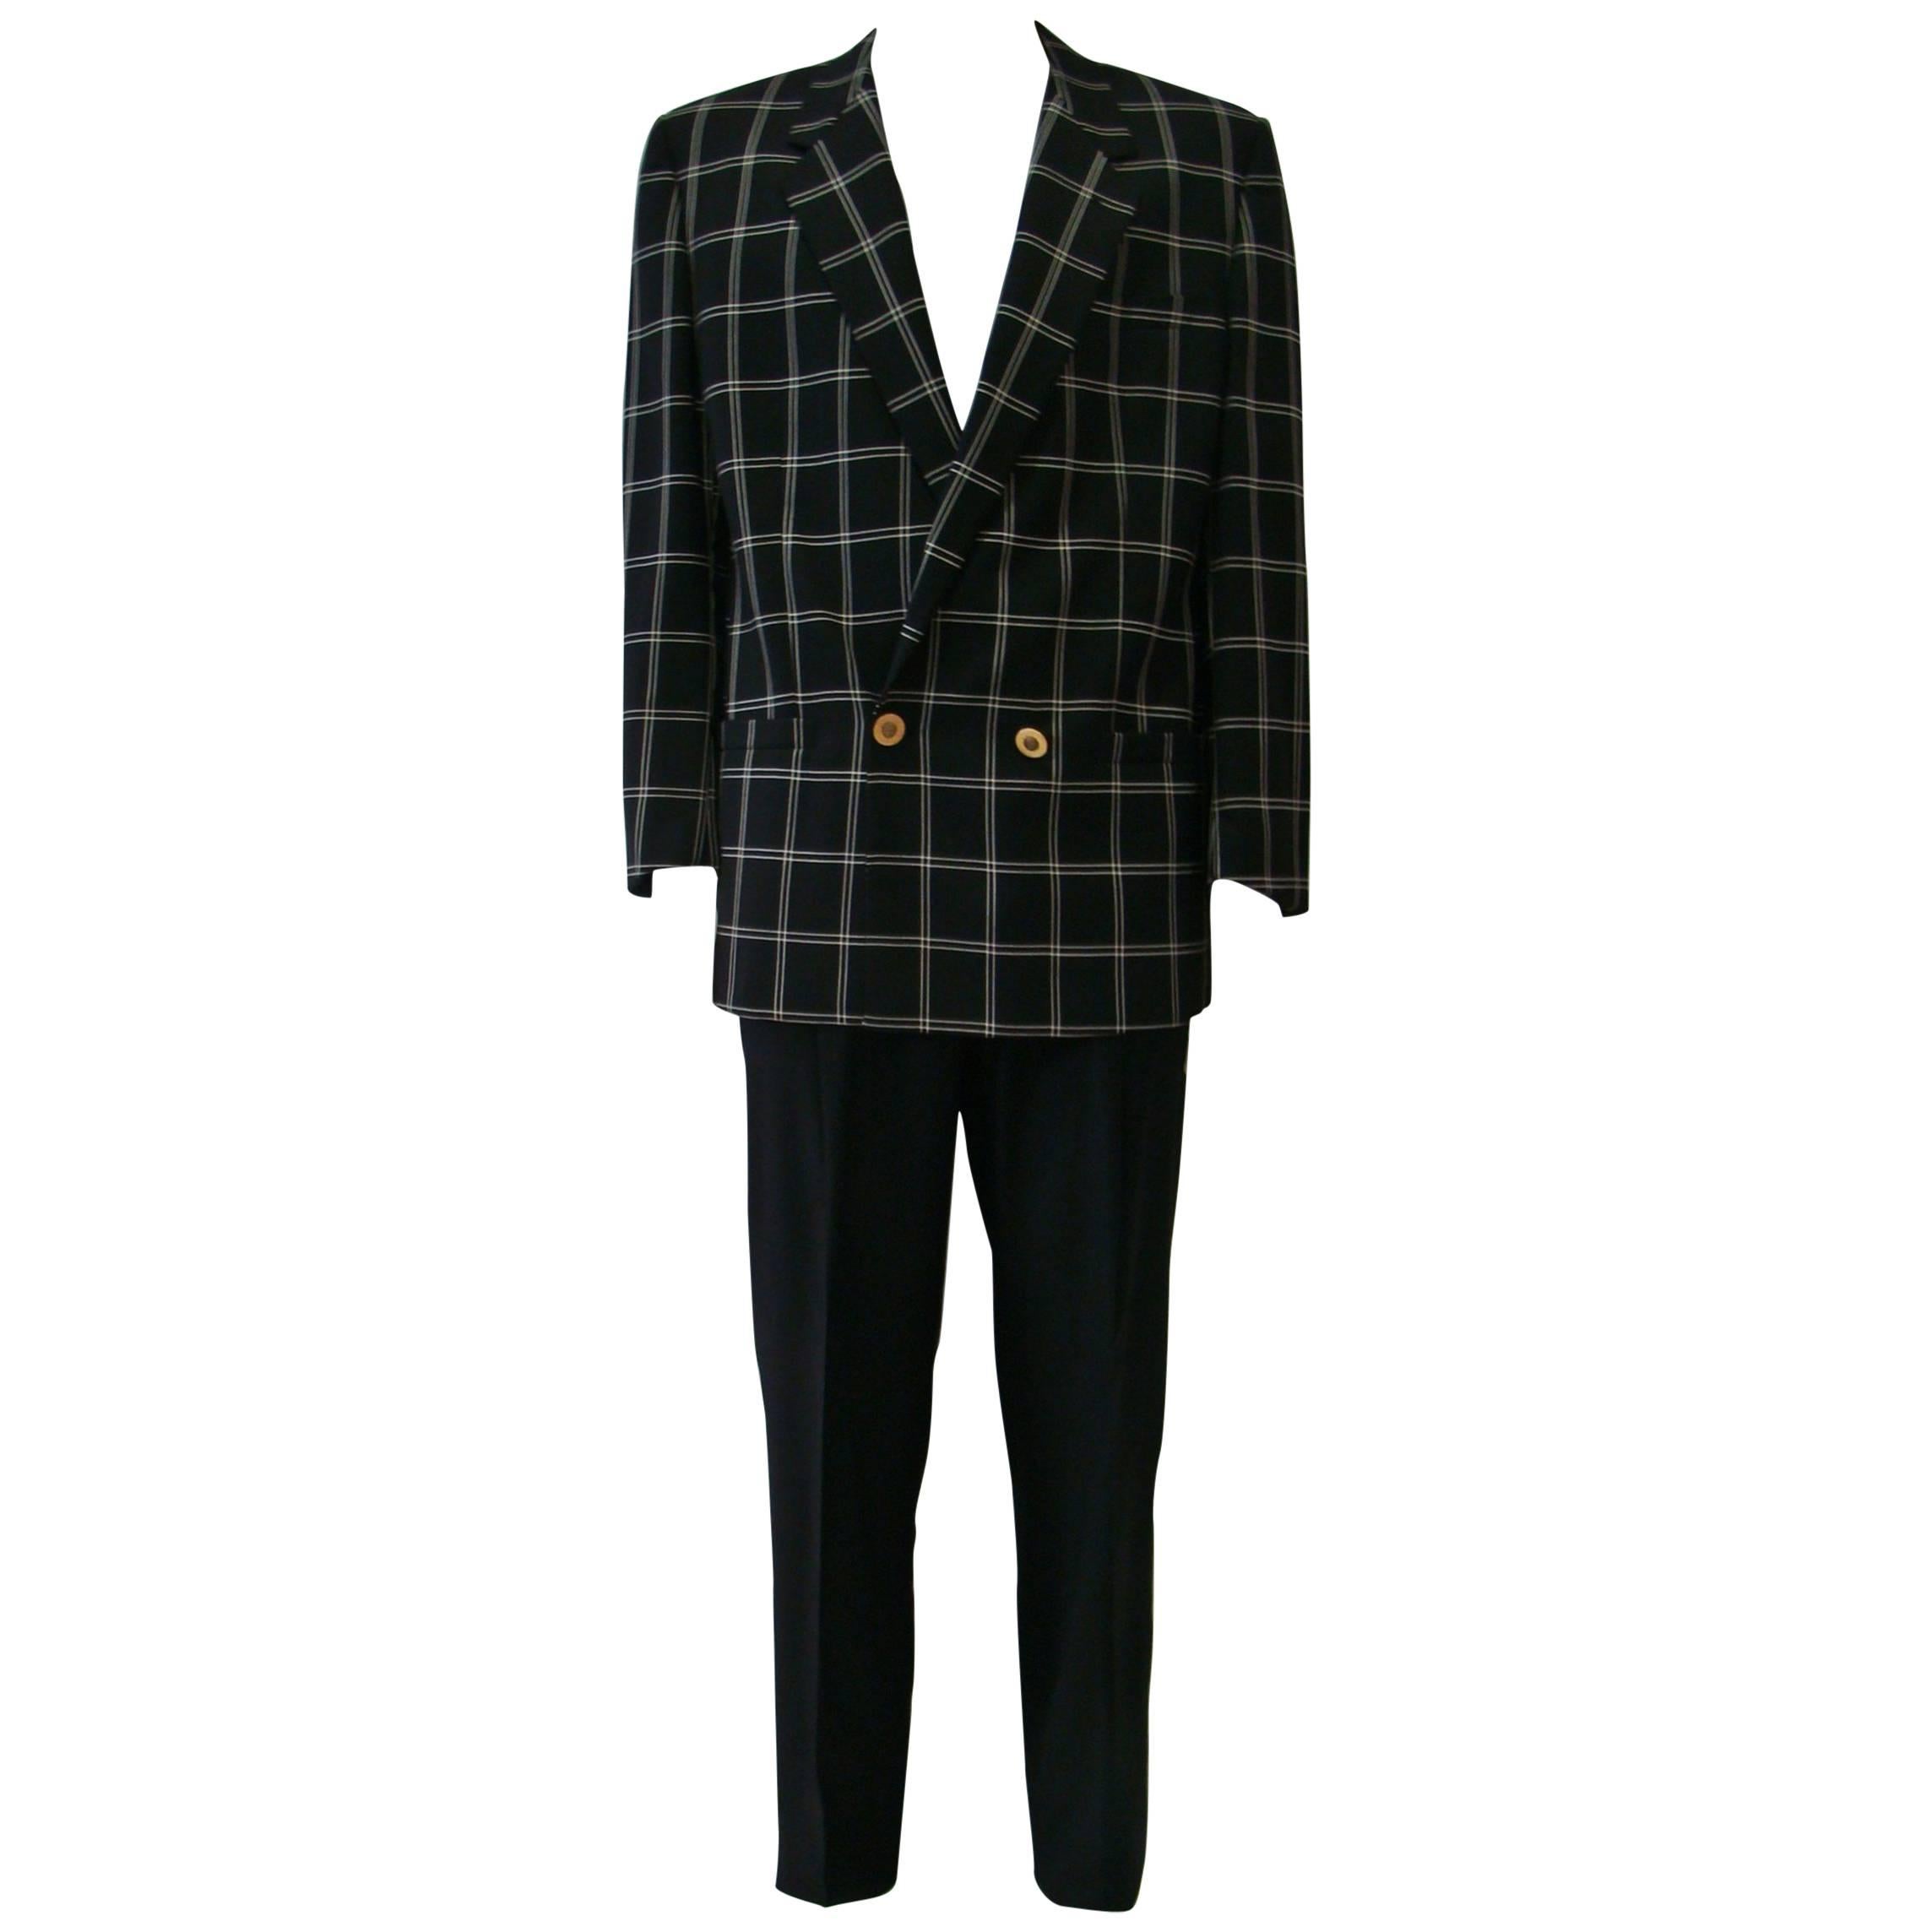 Unique Gianni Versace Checked Jacket With Smoking Pants Suit For Sale